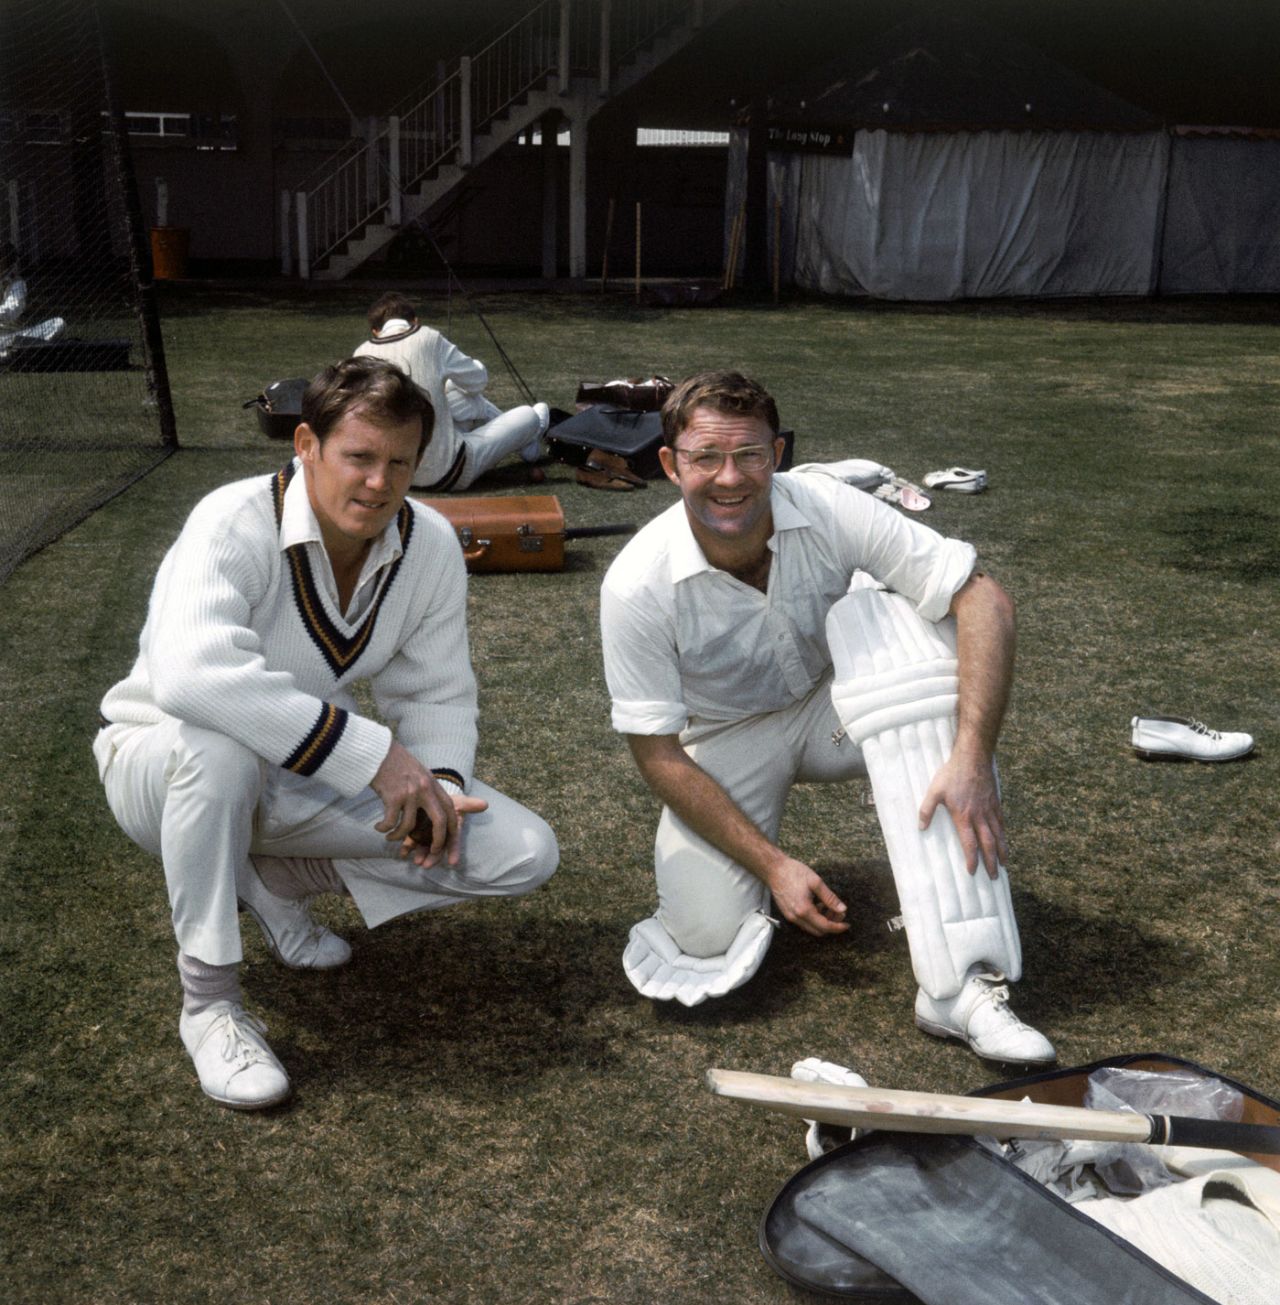 Graeme Pollock and Eddie Barlow in the nets, Lord's, June 15, 1970